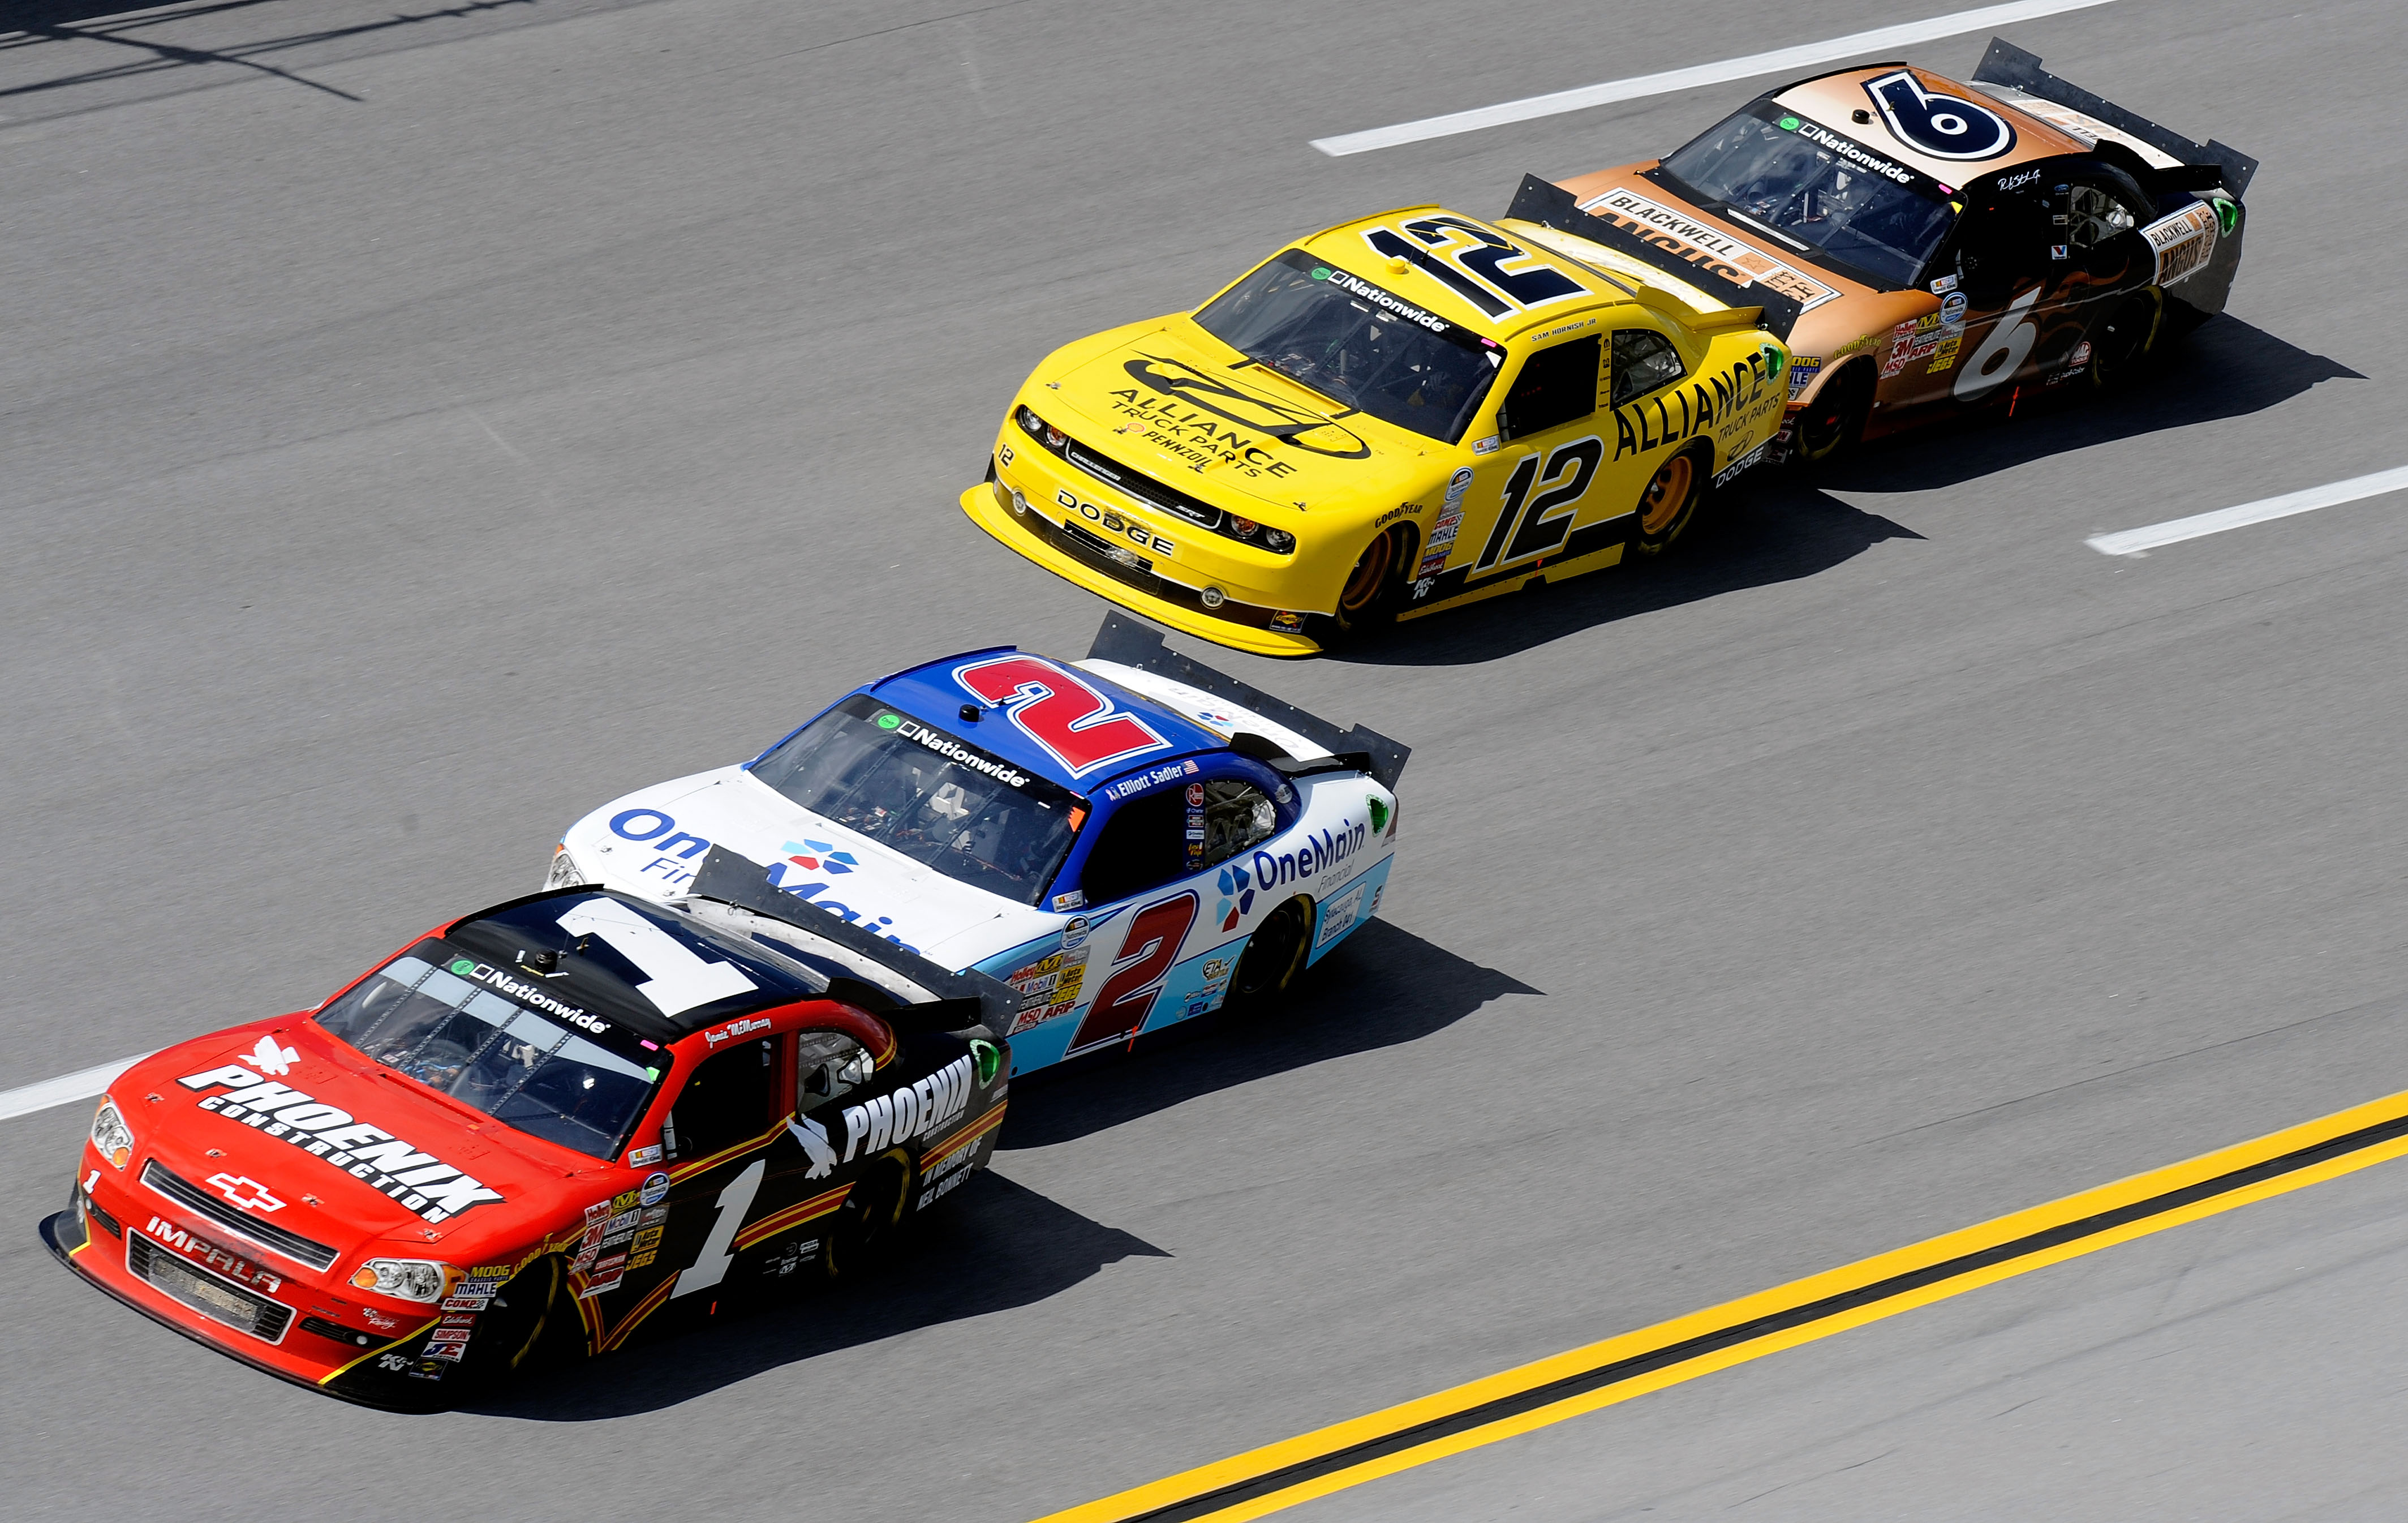 TALLADEGA, AL - APRIL 16:  Jamie McMurray, driver of the #1 Phoenix Construction Chevrolet, leads Elliott Sadler, driver of the #2 OneMain Financial Chevrolet, Sam Hornish Jr., driver of the #12 Alliance Truck Parts Dodge, and Ricky Stenhouse Jr., driver 